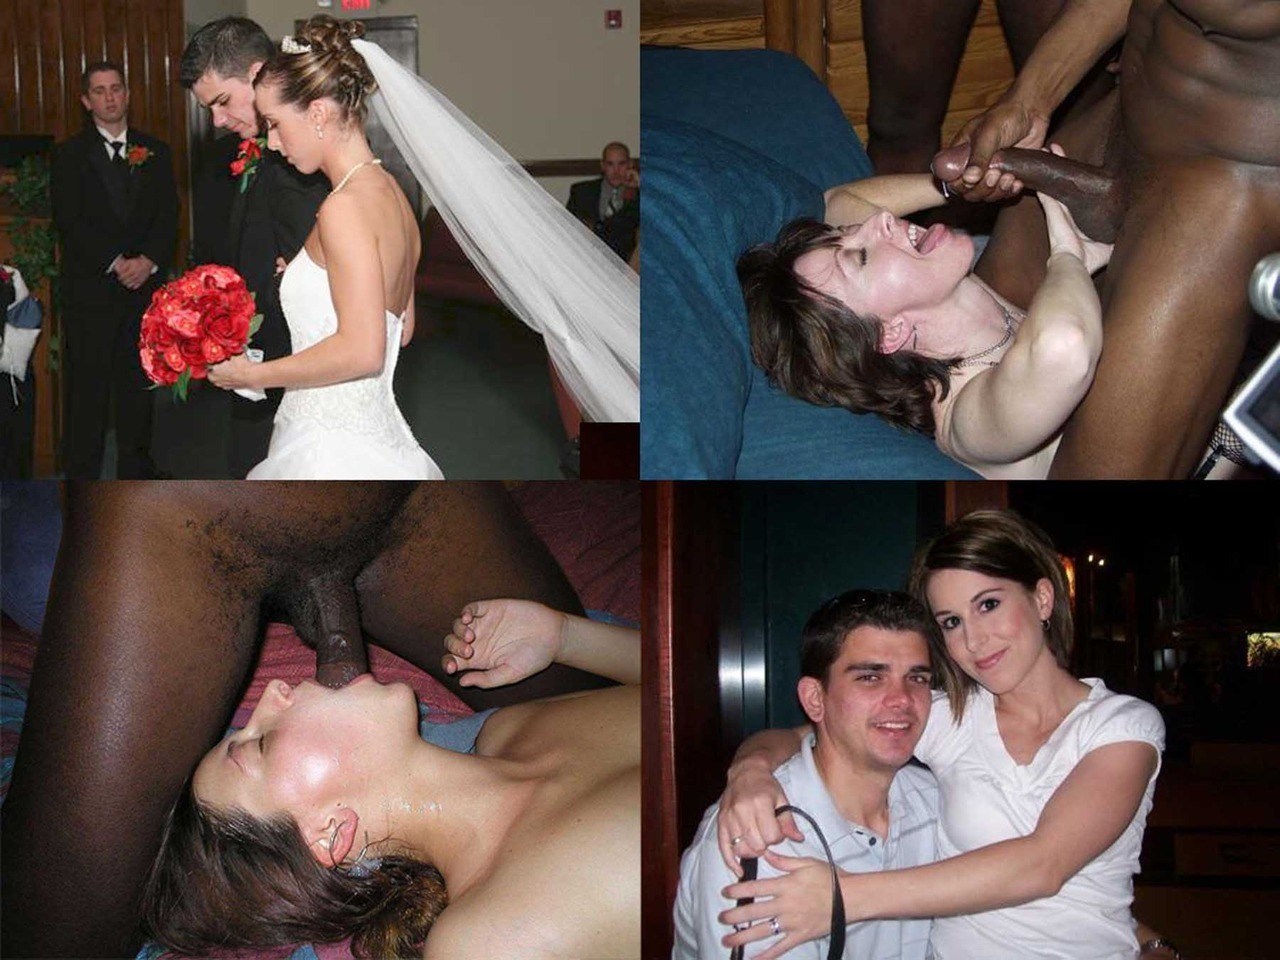 Sex with his wife on their wedding night (49 photos) pic pic